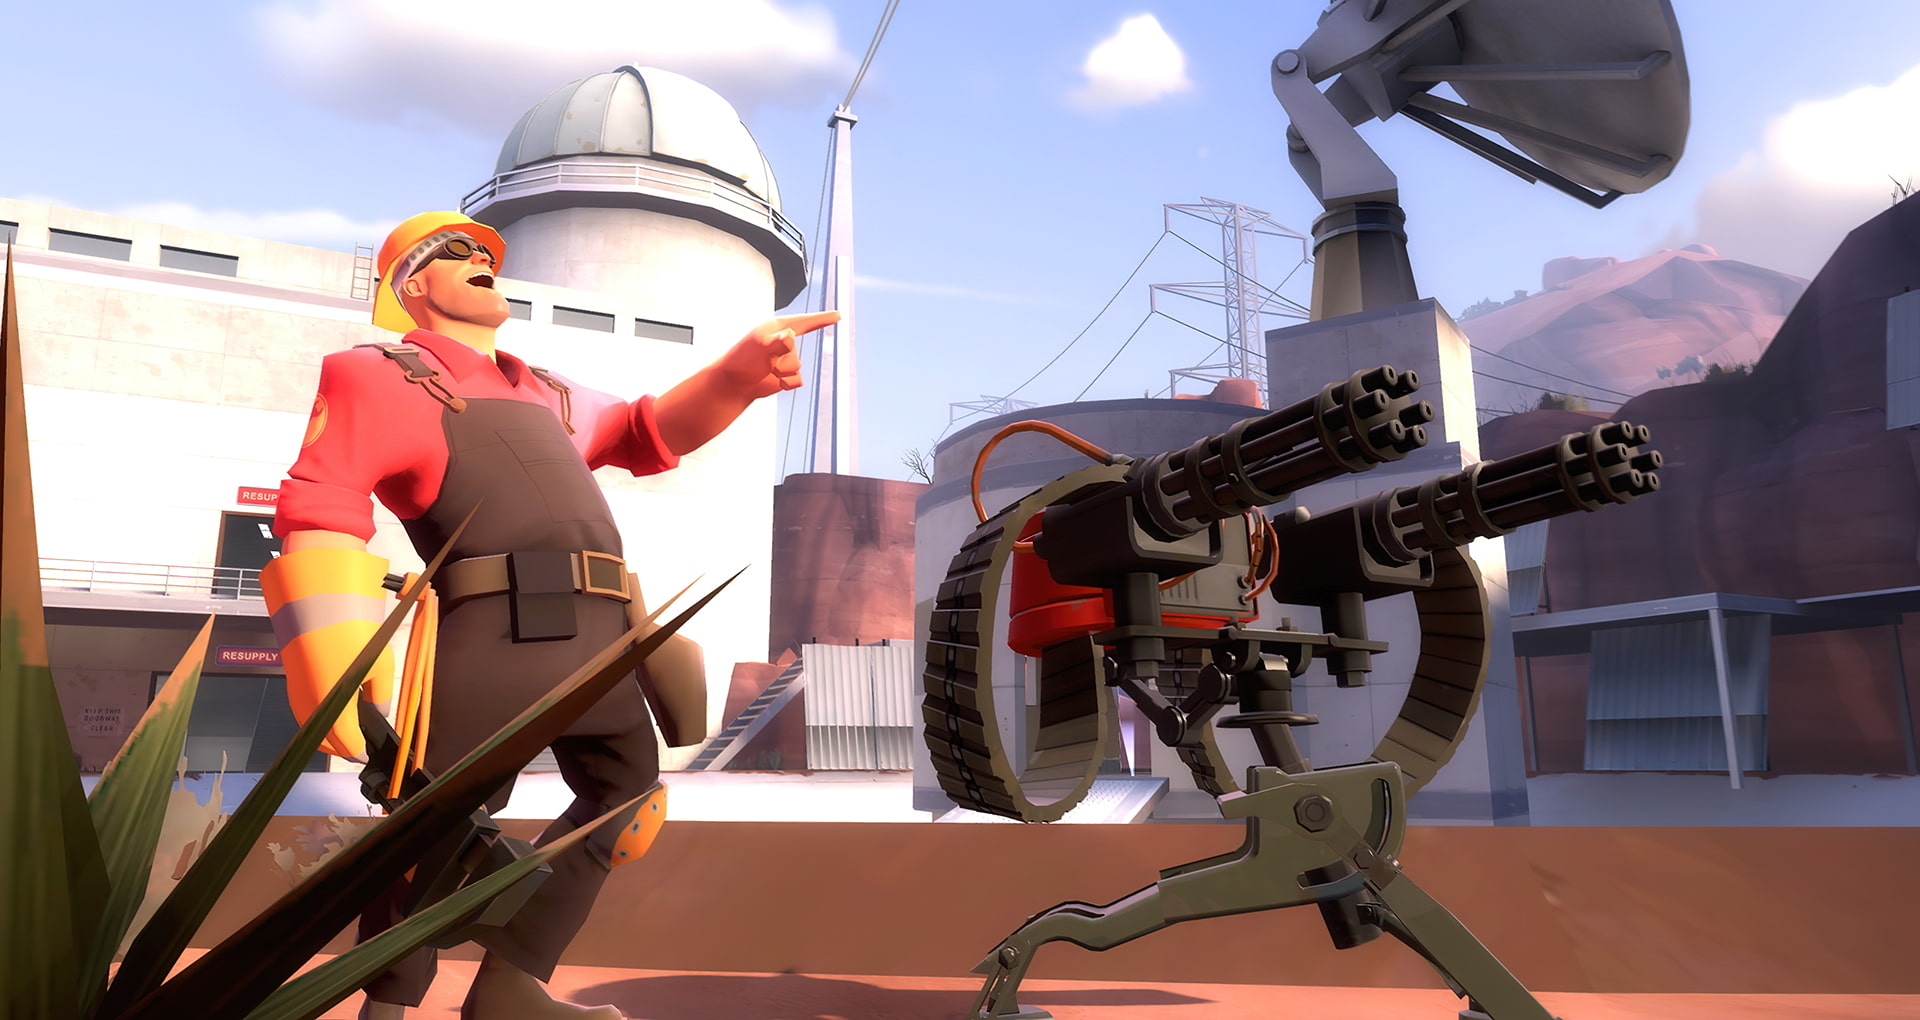 A pre-release screenshot of Team Fortress 2. A RED team Engineer points and laughs next to a level two sentry gun in the map Hydro.